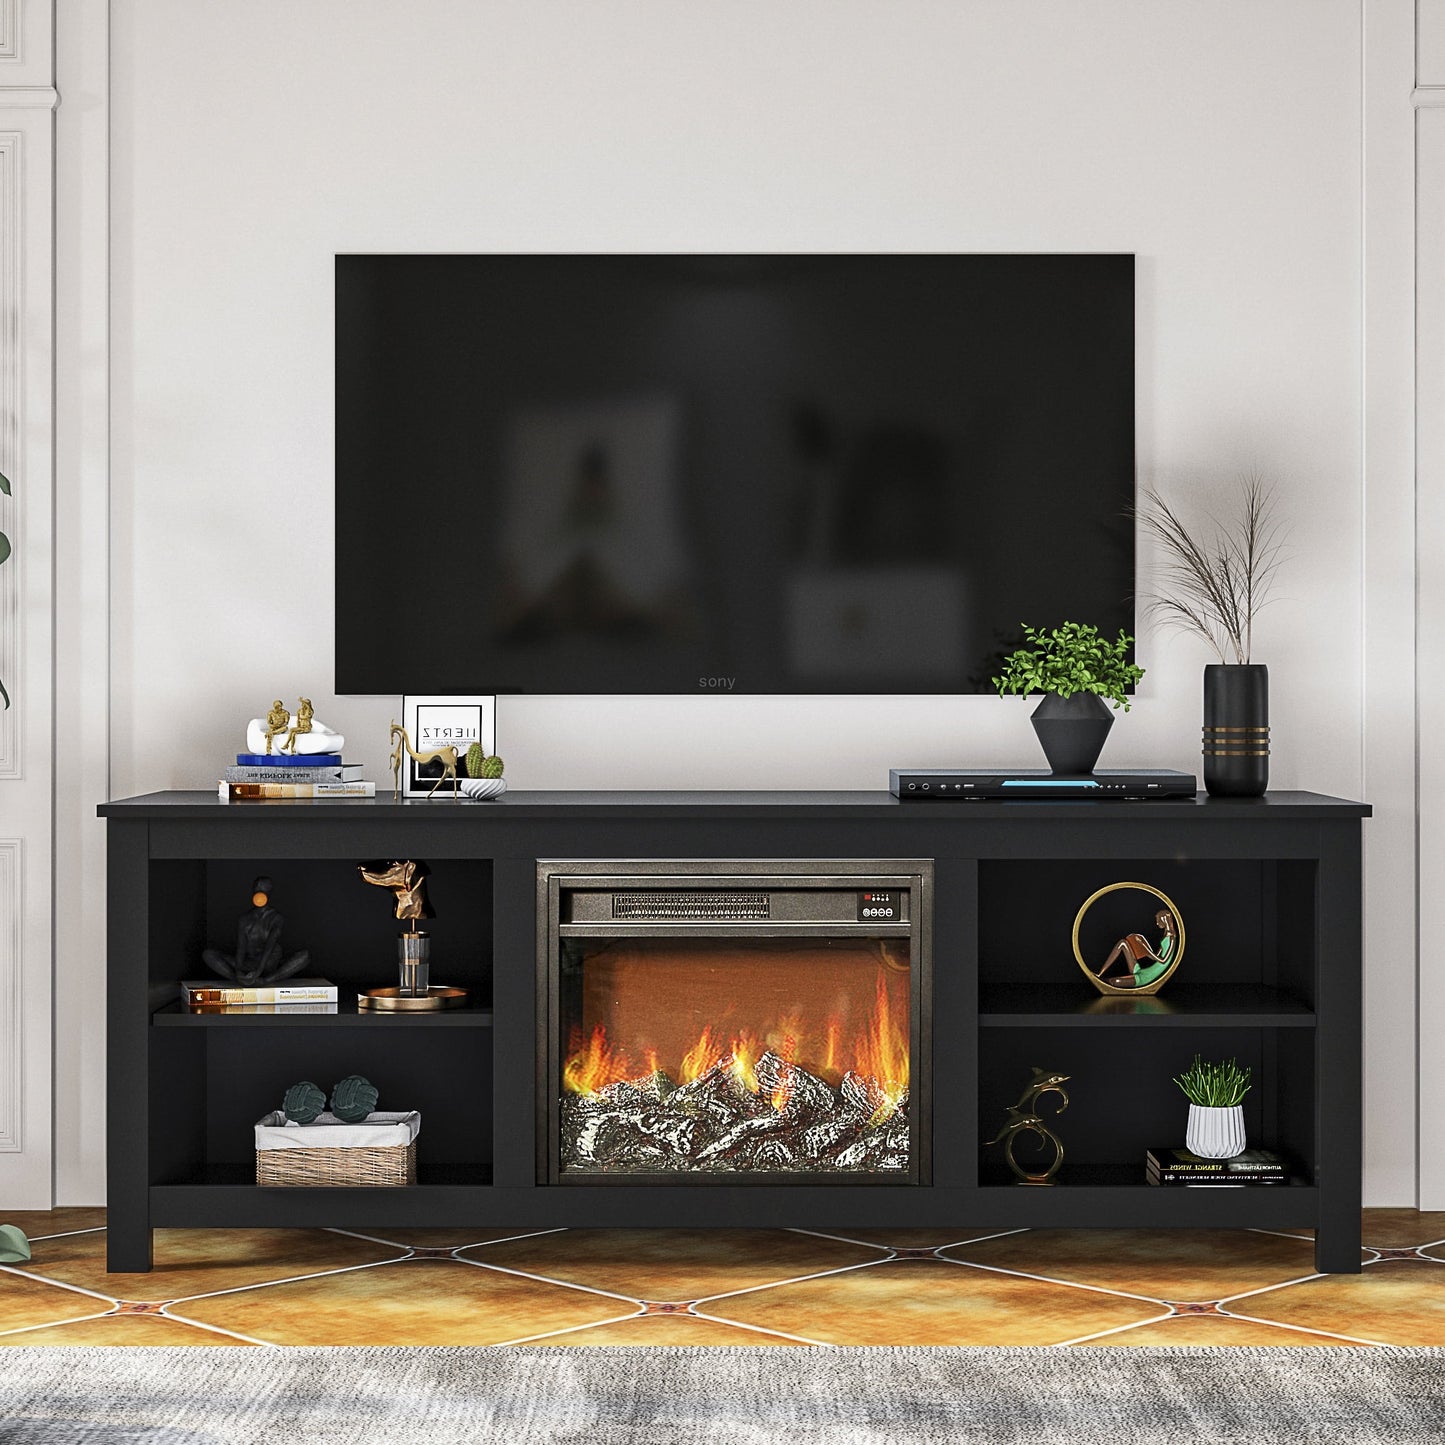 SYNGAR Modern TV Stand with Fireplace, Retro Farmhouse Fireplace TV Cabinet for TVs up to 65 inches with Storage, Entertainment Console TV Stand, for Living Room, Bedroom, Espresso, D3192